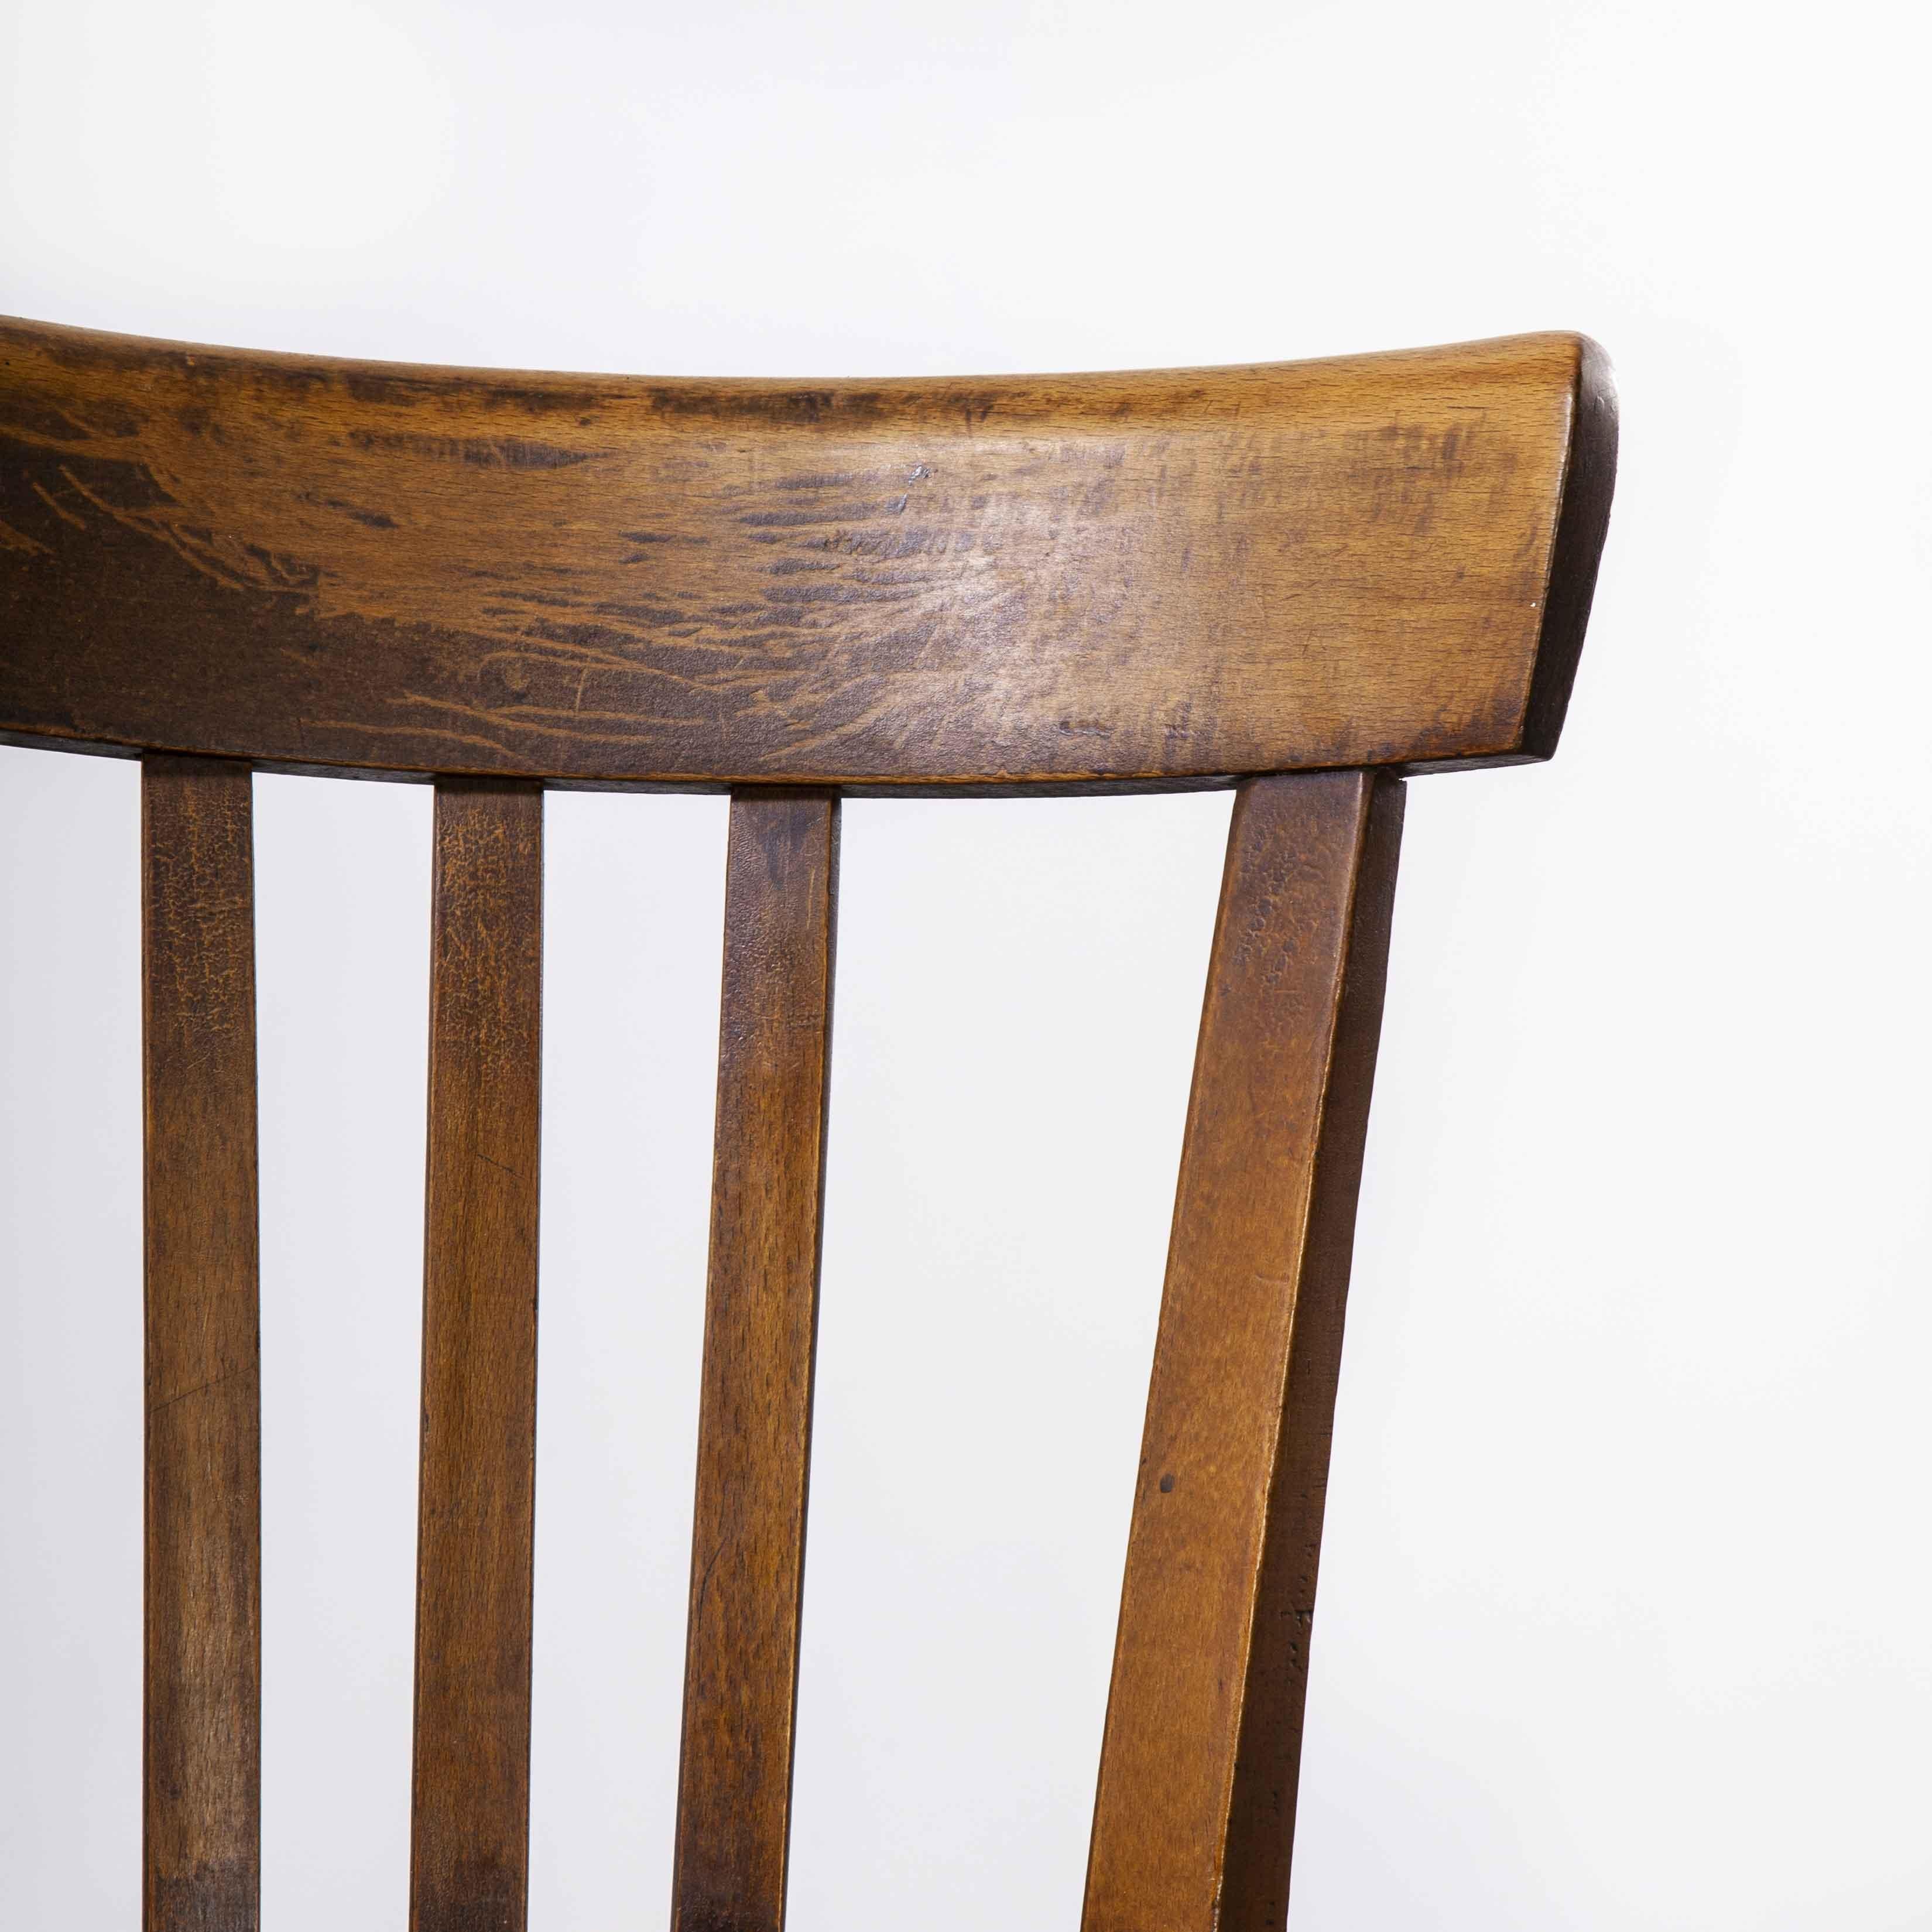 1950’s Baumann bentwood bistro dining chair – Model 3 – set of three. Classic beech bistro chair made in France by the maker Joamin Baumann. Baumann is a slightly off the radar French producer just starting to gain traction in the market. Baumann